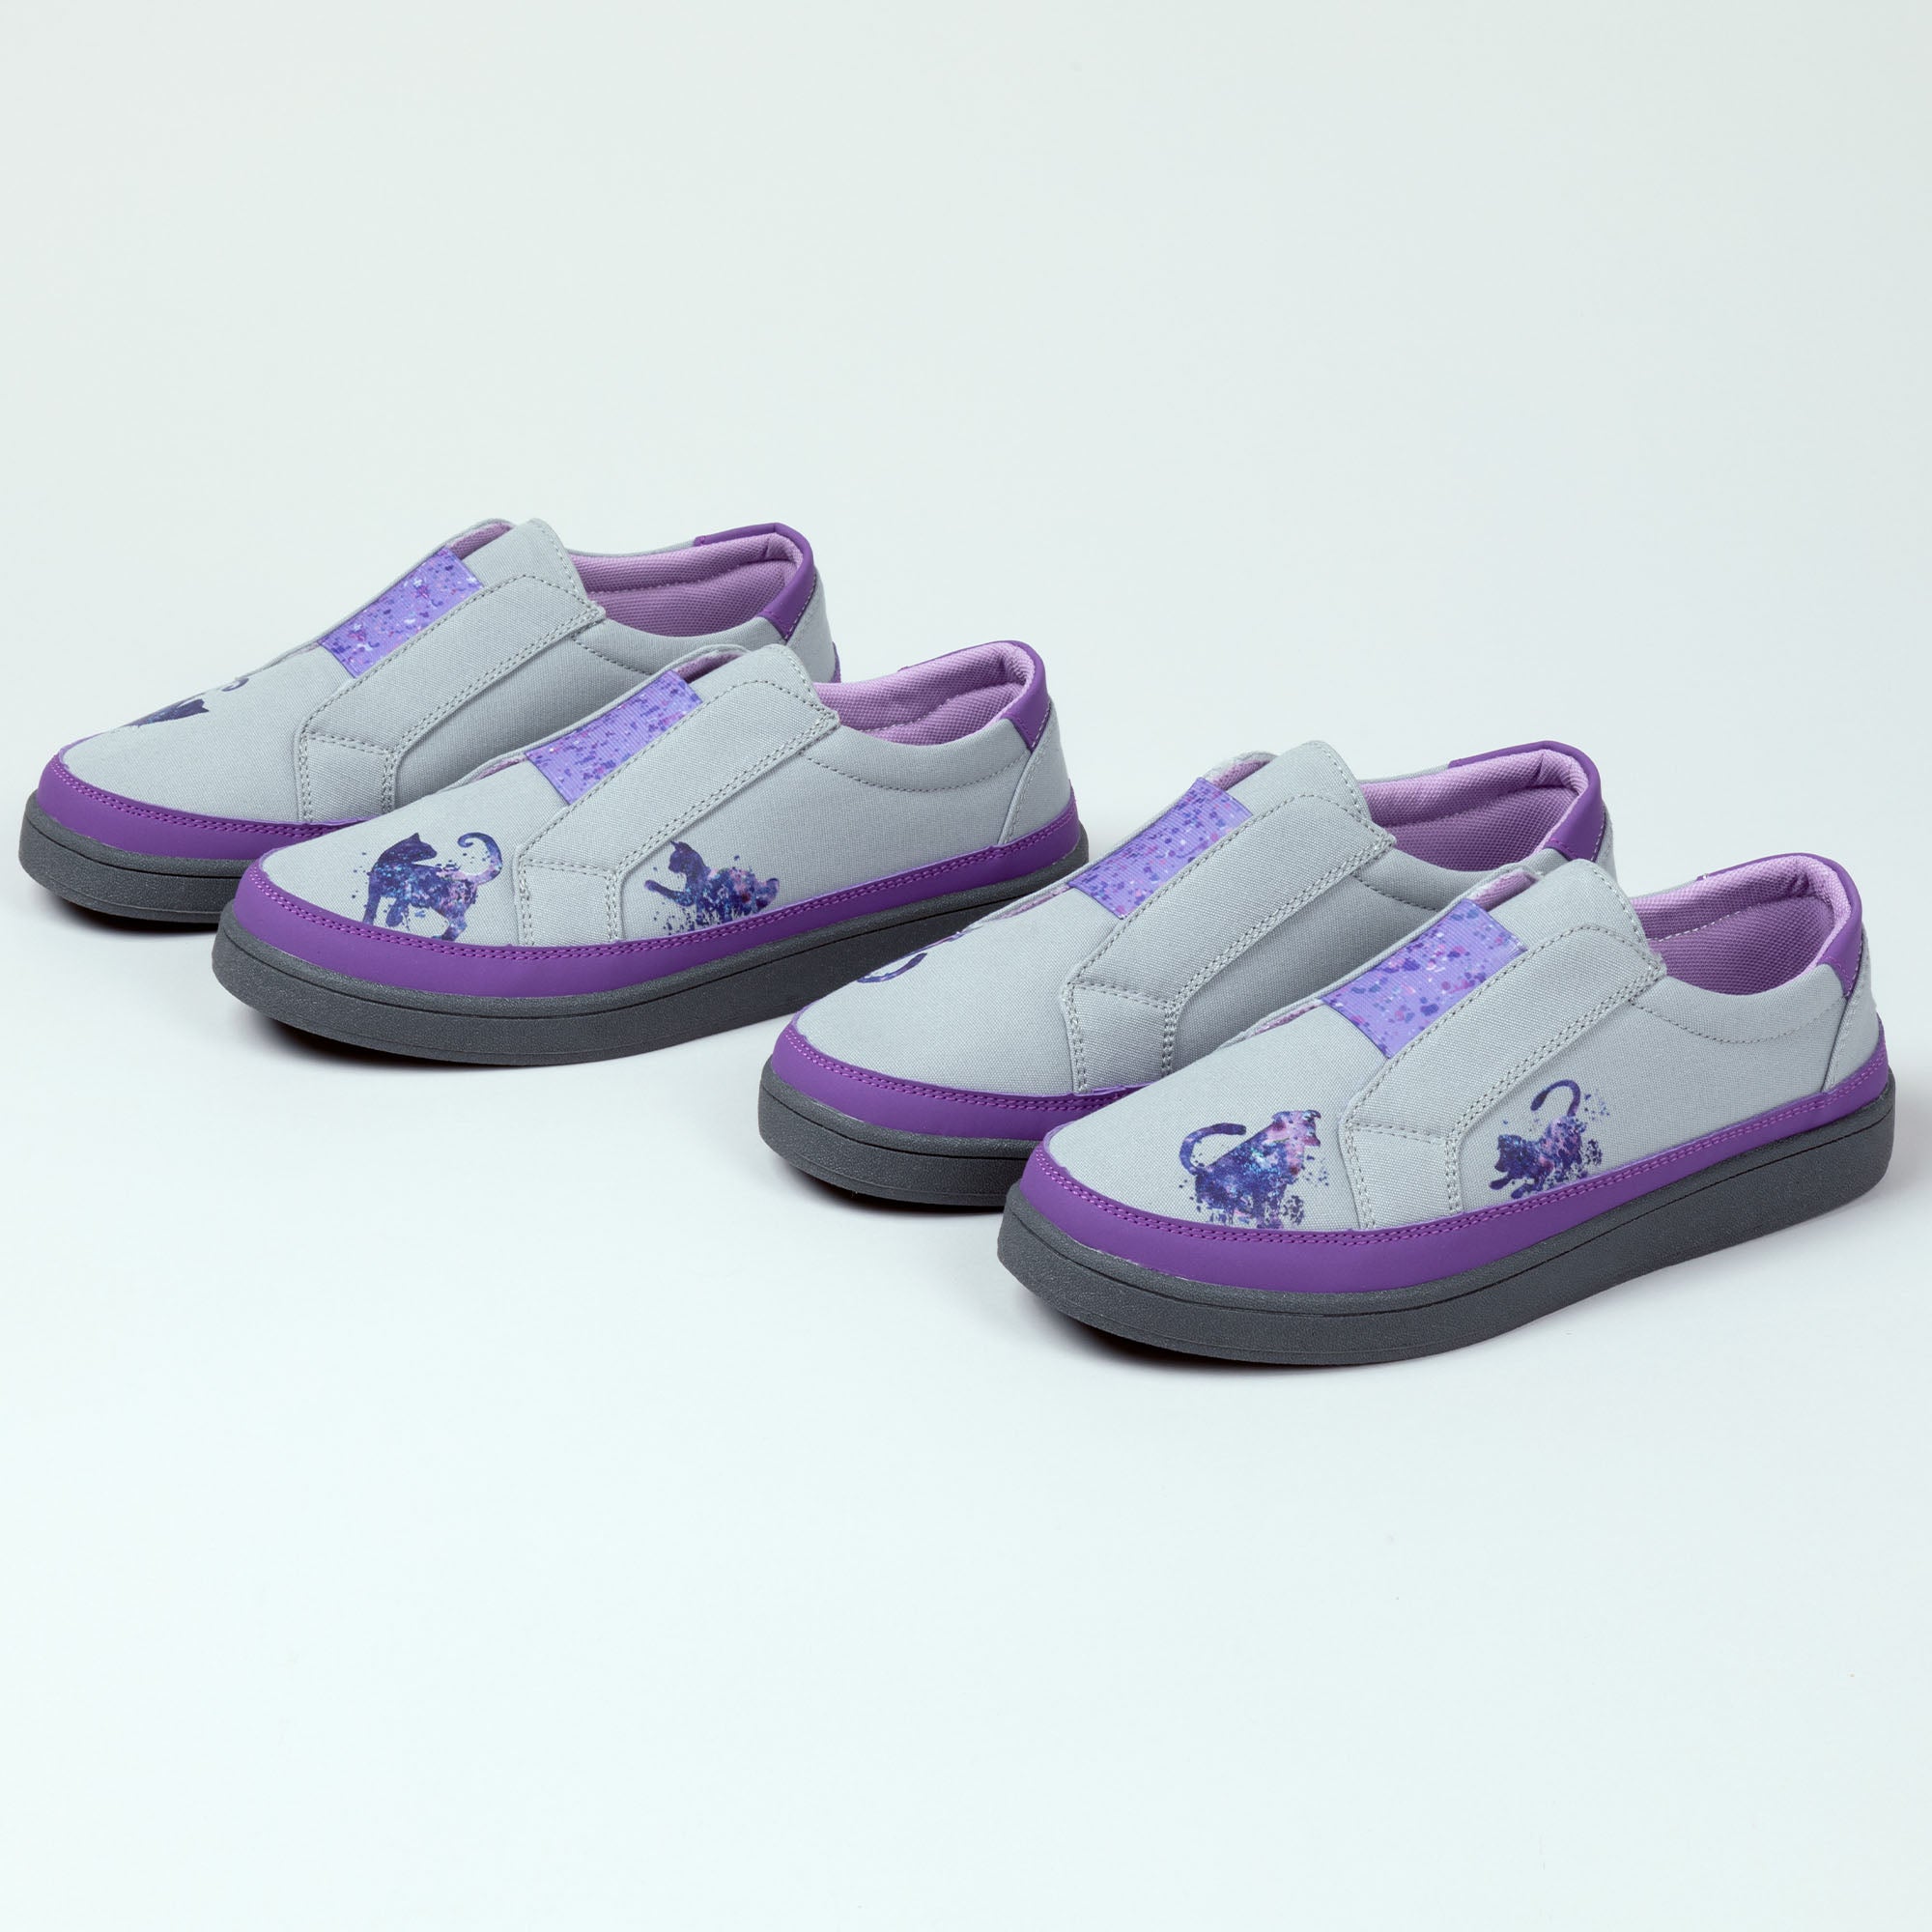 Playful Pets Slip-On Canvas Sneakers - Dog - 8